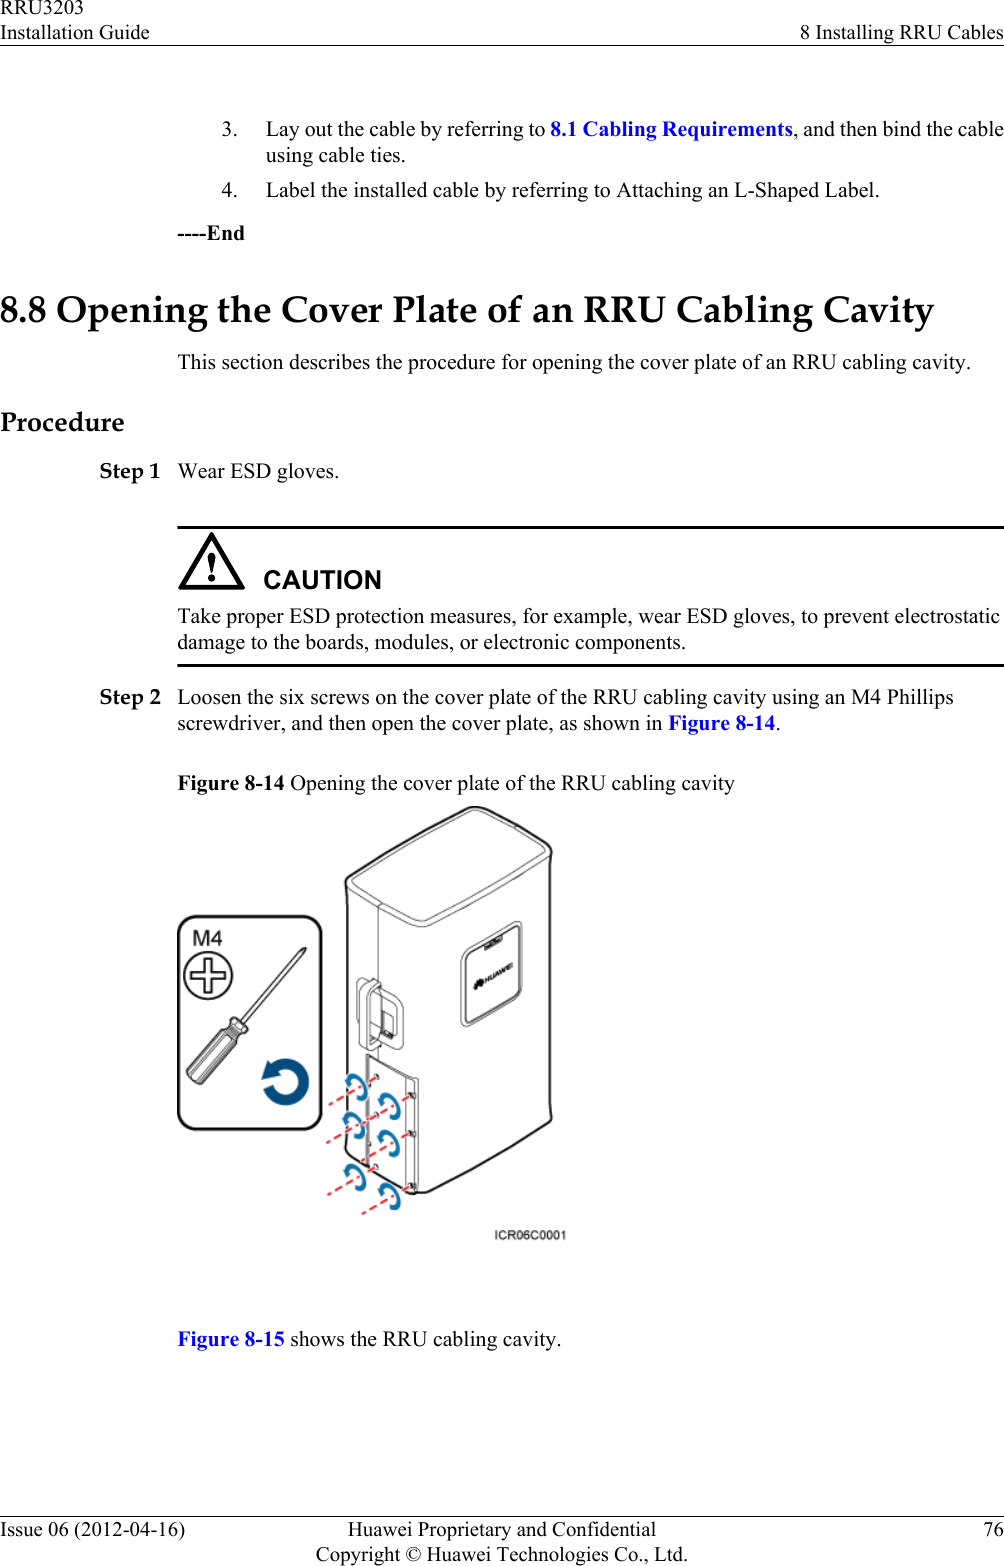  3. Lay out the cable by referring to 8.1 Cabling Requirements, and then bind the cableusing cable ties.4. Label the installed cable by referring to Attaching an L-Shaped Label.----End8.8 Opening the Cover Plate of an RRU Cabling CavityThis section describes the procedure for opening the cover plate of an RRU cabling cavity.ProcedureStep 1 Wear ESD gloves.CAUTIONTake proper ESD protection measures, for example, wear ESD gloves, to prevent electrostaticdamage to the boards, modules, or electronic components.Step 2 Loosen the six screws on the cover plate of the RRU cabling cavity using an M4 Phillipsscrewdriver, and then open the cover plate, as shown in Figure 8-14.Figure 8-14 Opening the cover plate of the RRU cabling cavity Figure 8-15 shows the RRU cabling cavity.RRU3203Installation Guide 8 Installing RRU CablesIssue 06 (2012-04-16) Huawei Proprietary and ConfidentialCopyright © Huawei Technologies Co., Ltd.76